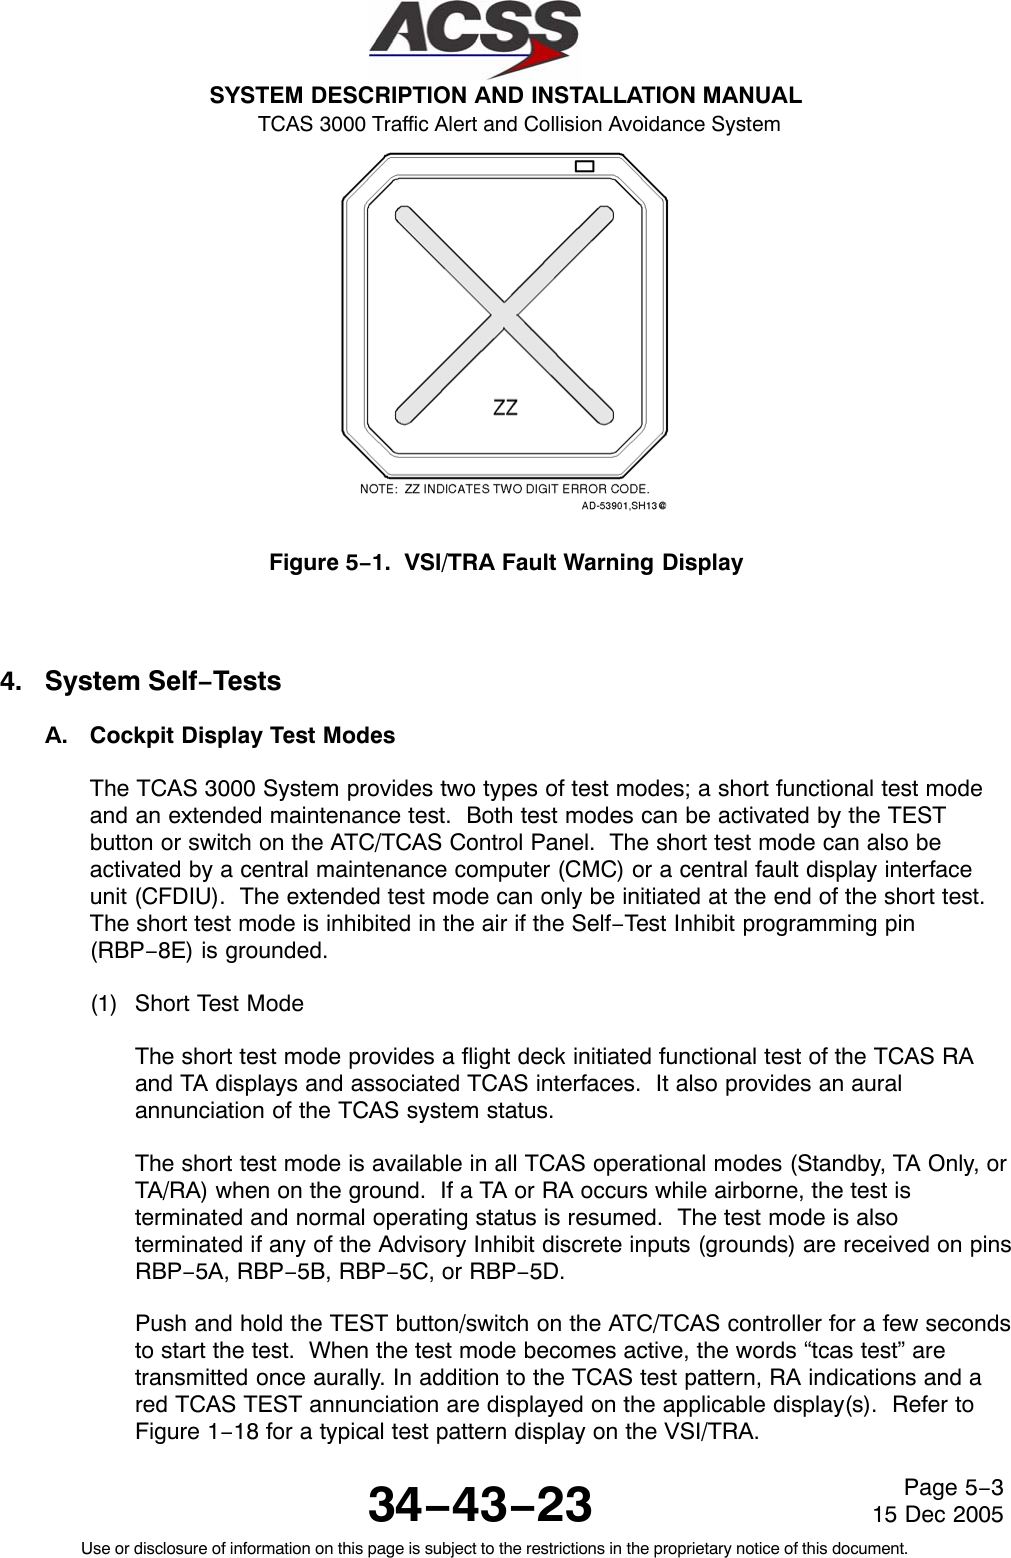 SYSTEM DESCRIPTION AND INSTALLATION MANUAL TCAS 3000 Traffic Alert and Collision Avoidance System34−43−23Use or disclosure of information on this page is subject to the restrictions in the proprietary notice of this document.Page 5−315 Dec 2005Figure 5−1.  VSI/TRA Fault Warning Display4. System Self−TestsA. Cockpit Display Test ModesThe TCAS 3000 System provides two types of test modes; a short functional test modeand an extended maintenance test.  Both test modes can be activated by the TESTbutton or switch on the ATC/TCAS Control Panel.  The short test mode can also beactivated by a central maintenance computer (CMC) or a central fault display interfaceunit (CFDIU).  The extended test mode can only be initiated at the end of the short test.The short test mode is inhibited in the air if the Self−Test Inhibit programming pin(RBP−8E) is grounded.(1) Short Test ModeThe short test mode provides a flight deck initiated functional test of the TCAS RAand TA displays and associated TCAS interfaces.  It also provides an auralannunciation of the TCAS system status.The short test mode is available in all TCAS operational modes (Standby, TA Only, orTA/RA) when on the ground.  If a TA or RA occurs while airborne, the test isterminated and normal operating status is resumed.  The test mode is alsoterminated if any of the Advisory Inhibit discrete inputs (grounds) are received on pinsRBP−5A, RBP−5B, RBP−5C, or RBP−5D.Push and hold the TEST button/switch on the ATC/TCAS controller for a few secondsto start the test.  When the test mode becomes active, the words “tcas test” aretransmitted once aurally. In addition to the TCAS test pattern, RA indications and ared TCAS TEST annunciation are displayed on the applicable display(s).  Refer toFigure 1−18 for a typical test pattern display on the VSI/TRA.